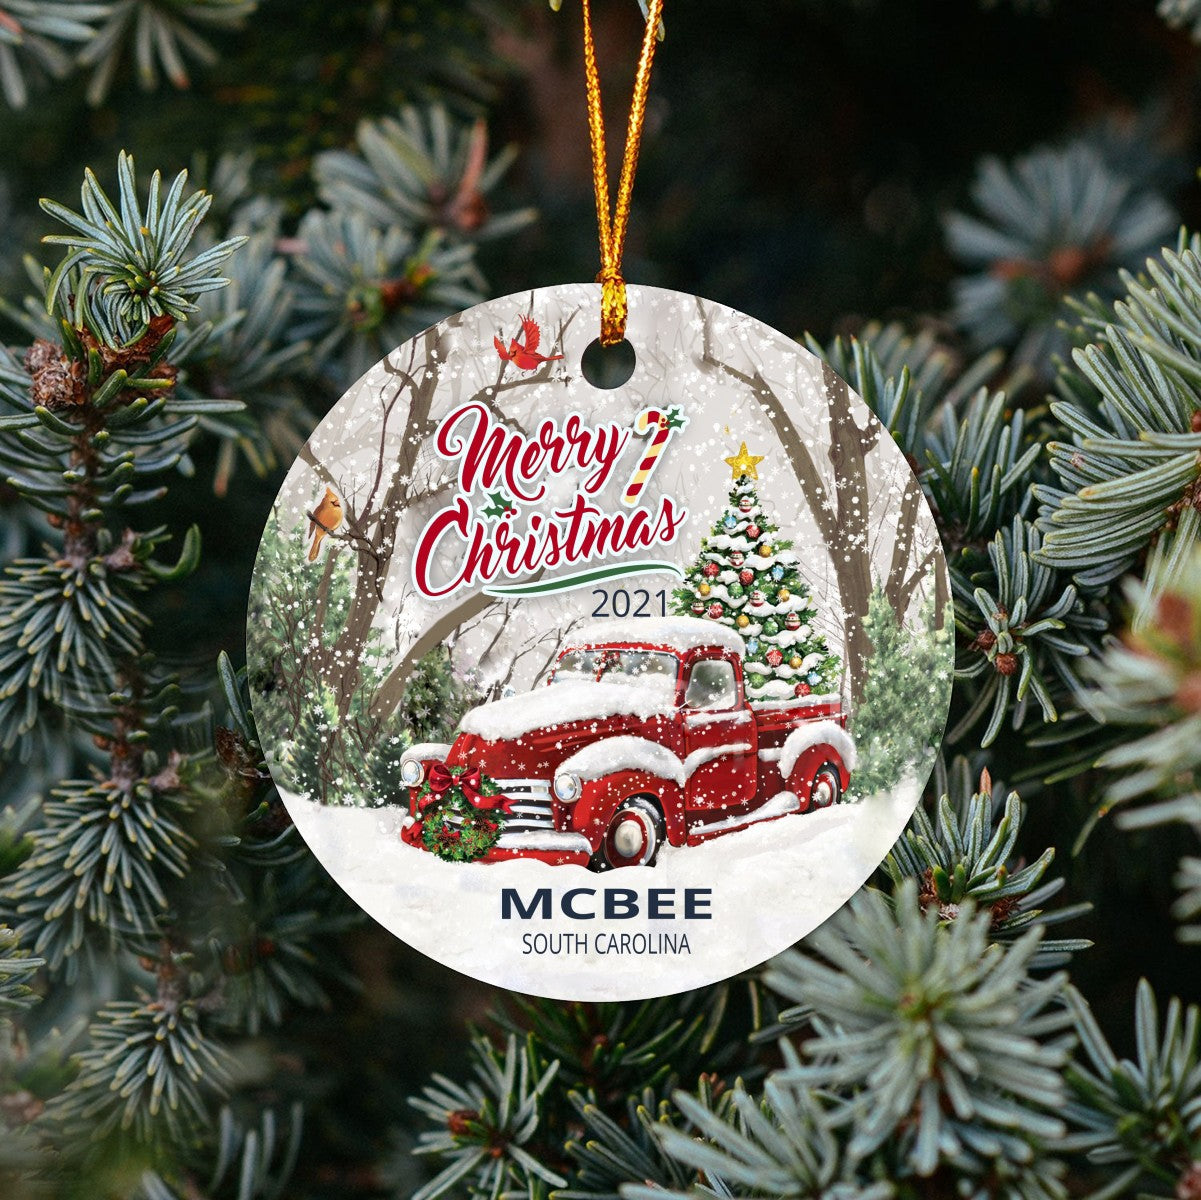 Christmas Tree Ornaments McBee - Ornament With Name City, State McBee South Carolina SC Ornament - Red Truck Xmas Ornaments 3'' Plastic Gift For Family, Friend And Housewarming